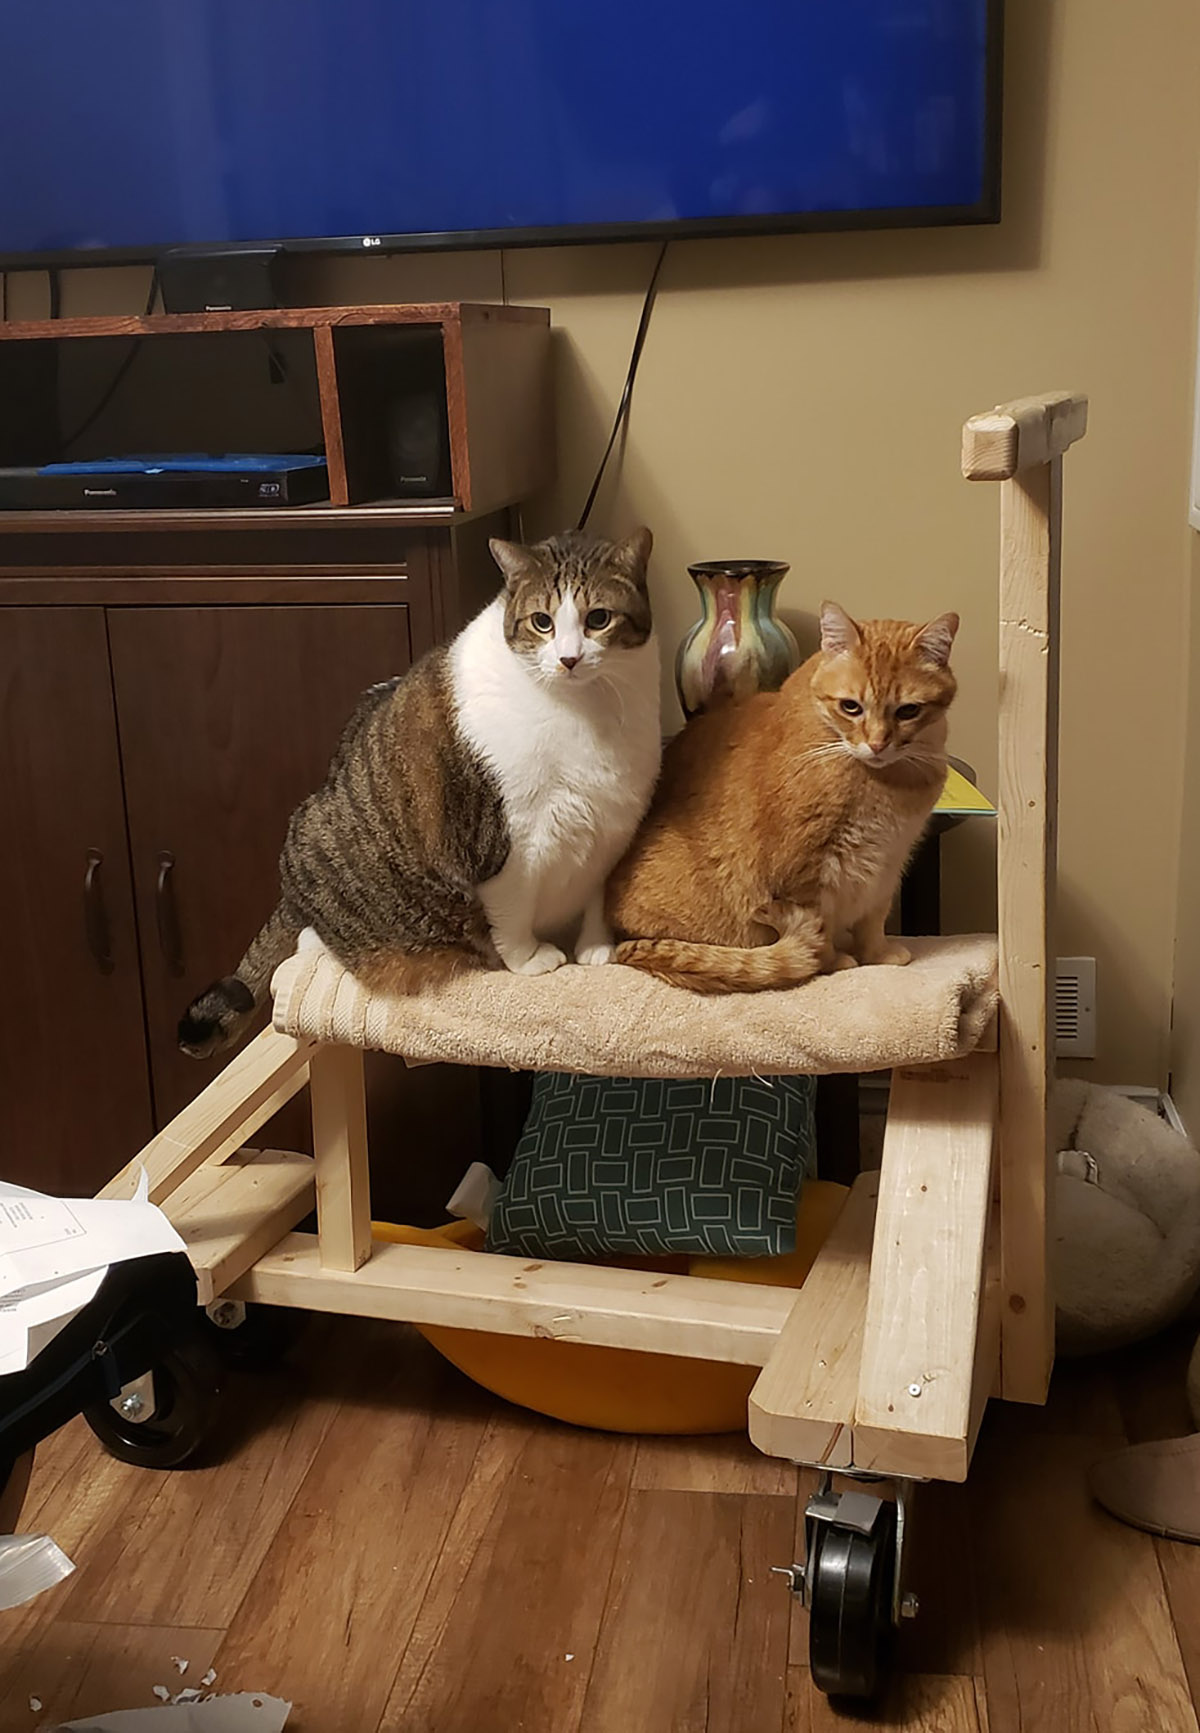 Two cats on a homemade wooden knee scooter.